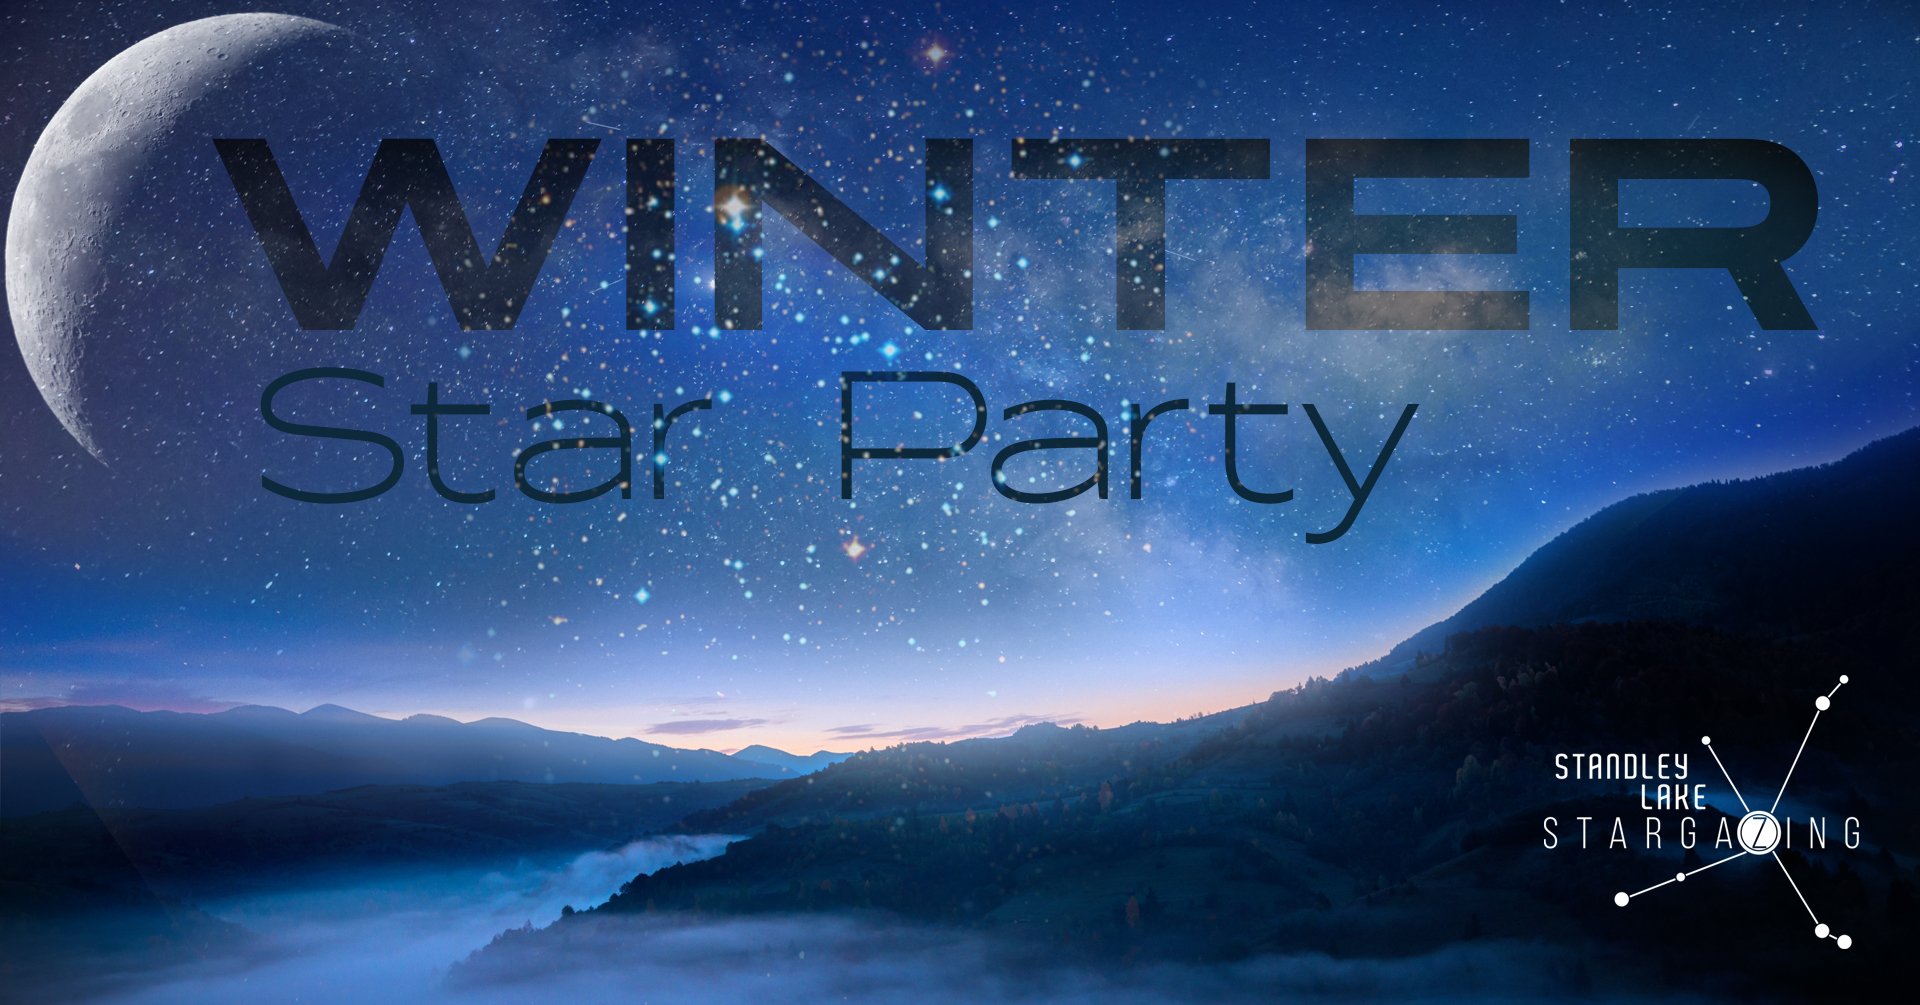 Winter Star Party (Outdoors) — Standley Lake Stargazing